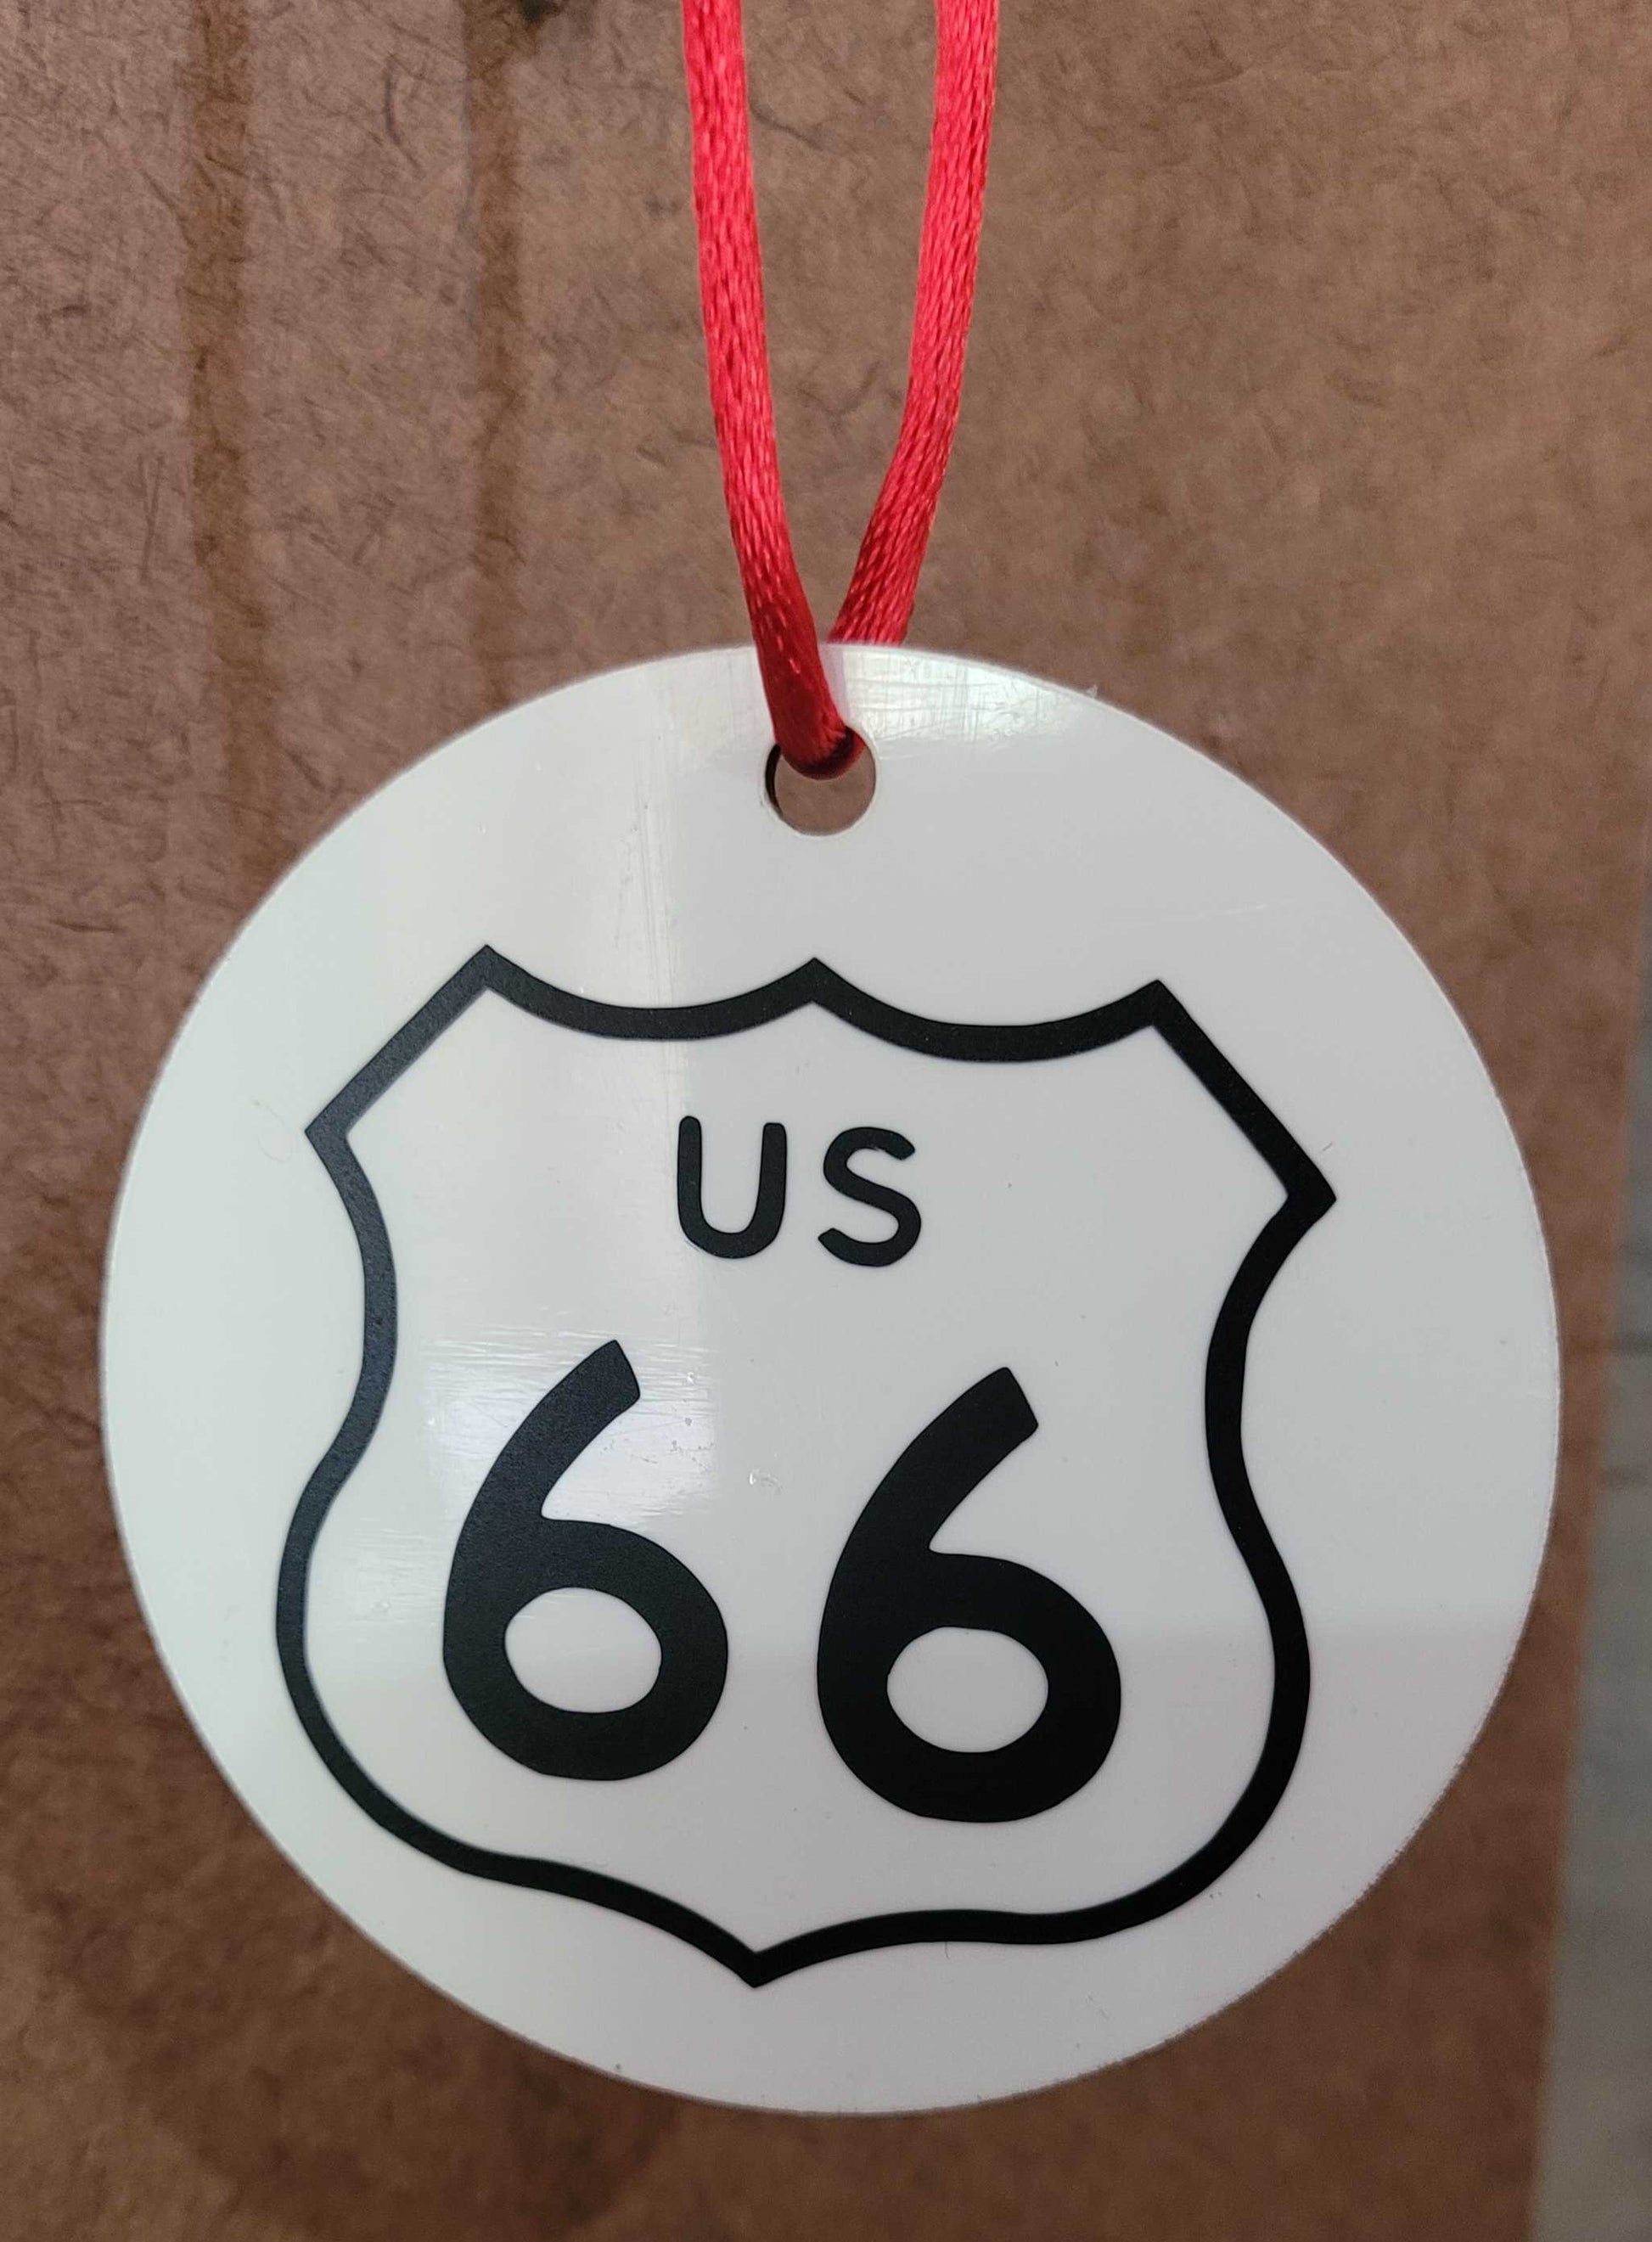 US 66 highway shield on round Christmas ornament